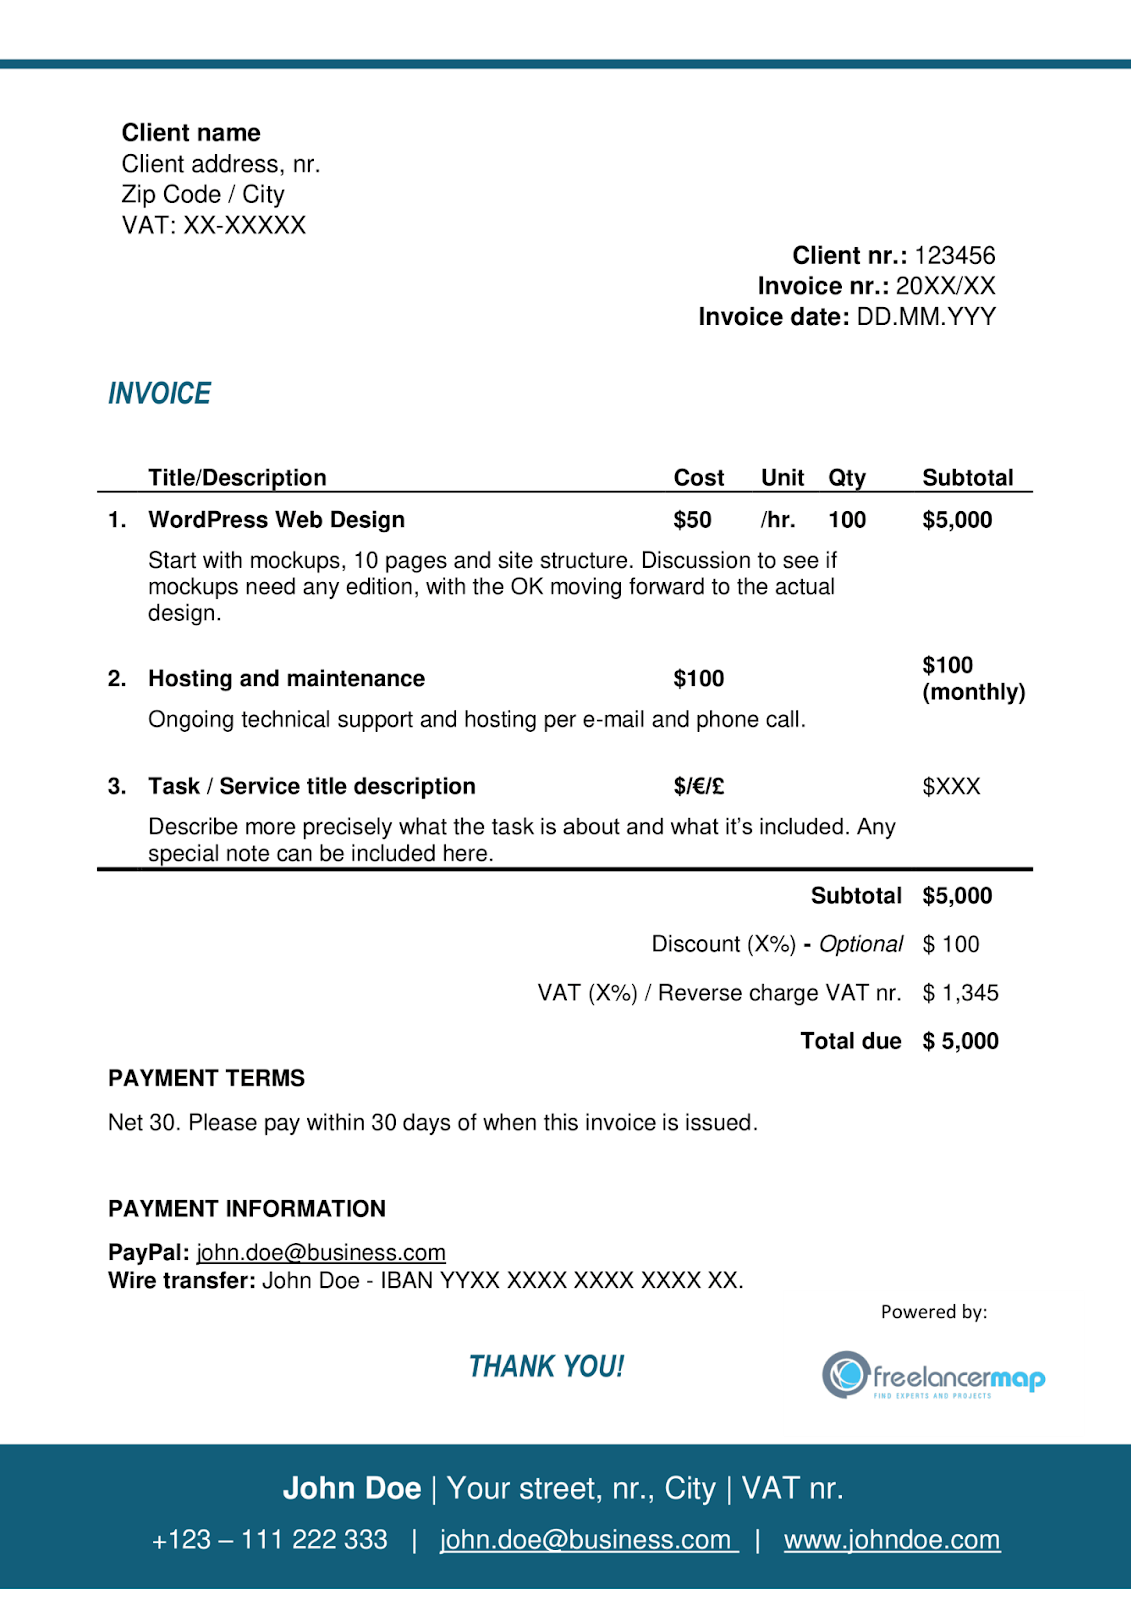 Net 30 Payment Term Invoice Example